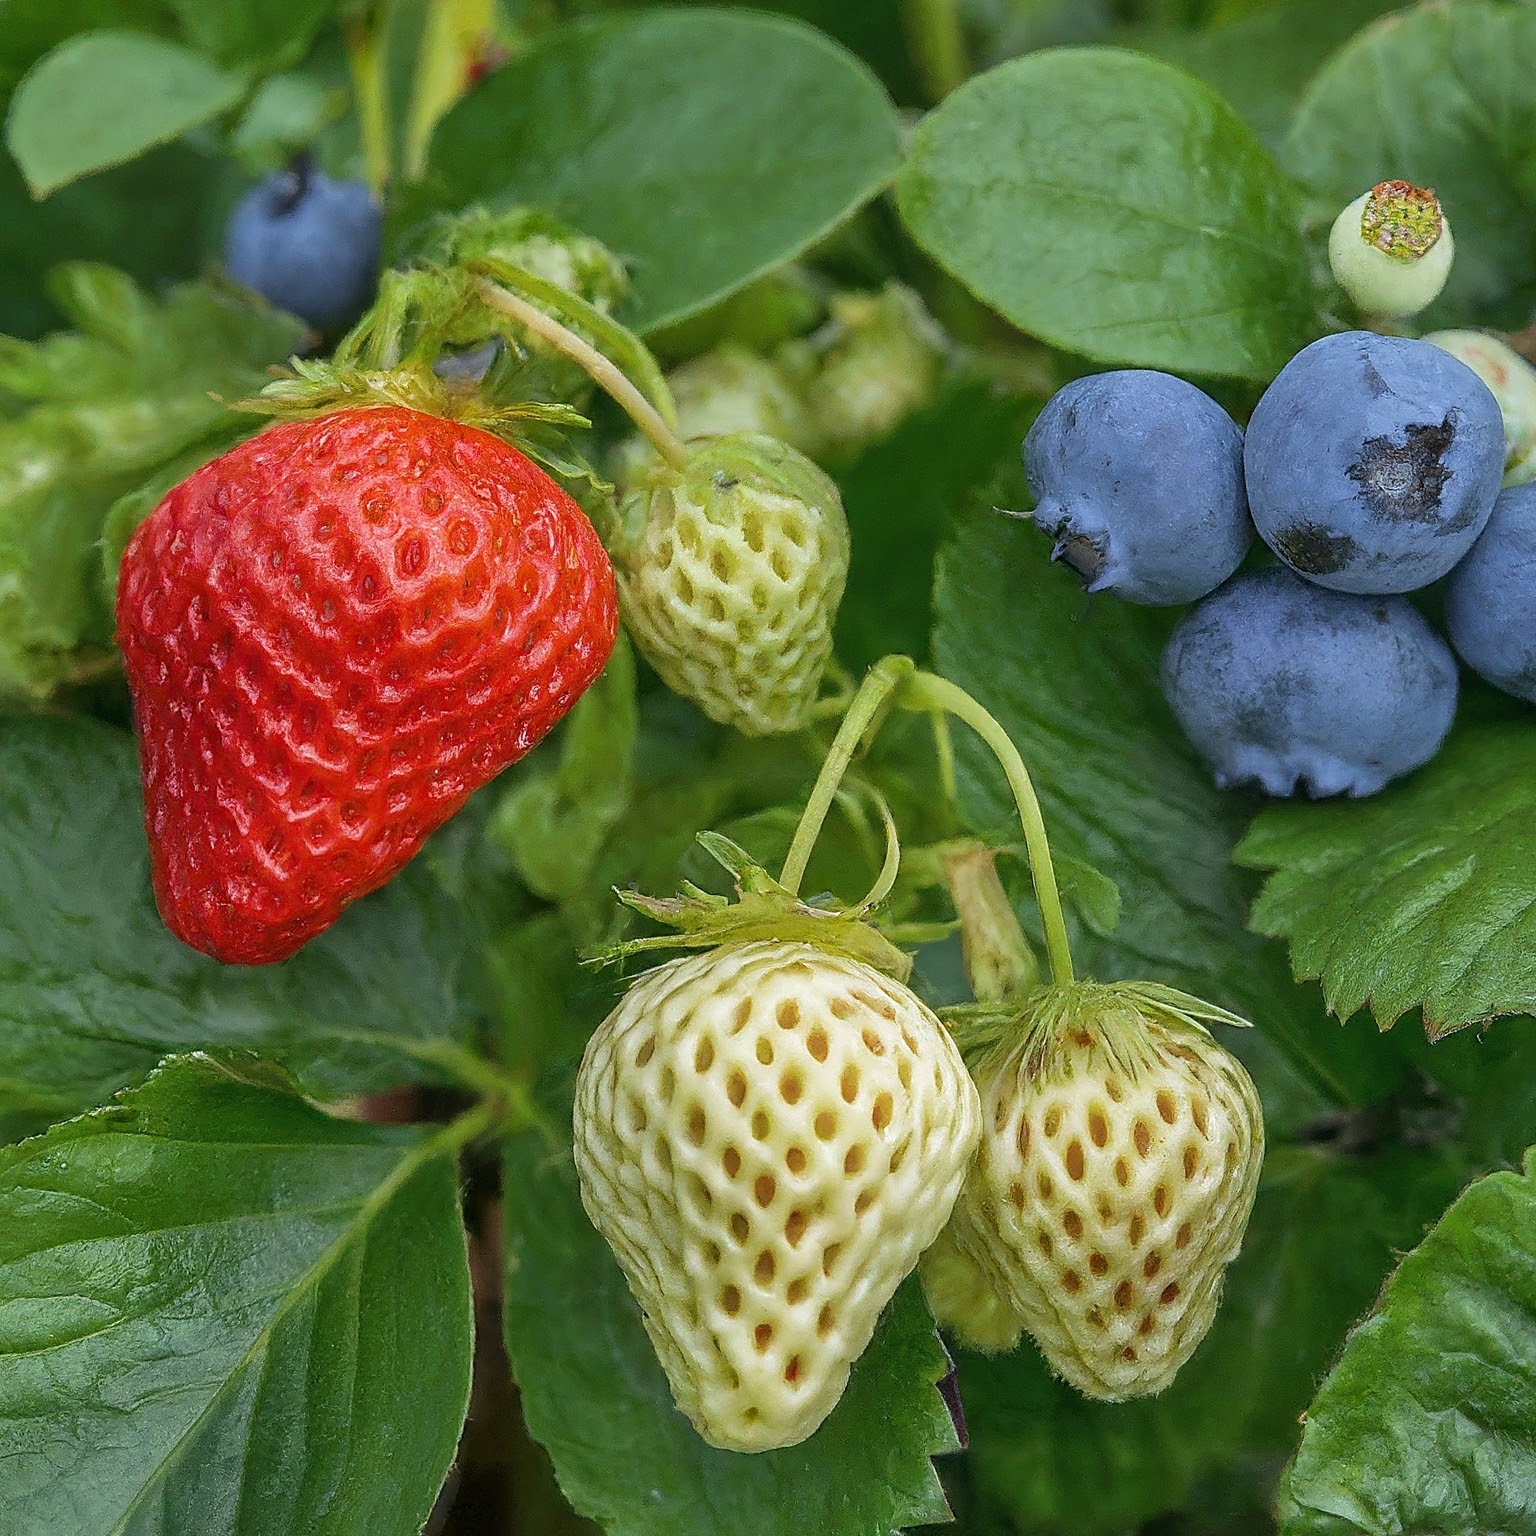 Can You Grow Strawberries & Blueberries Together?